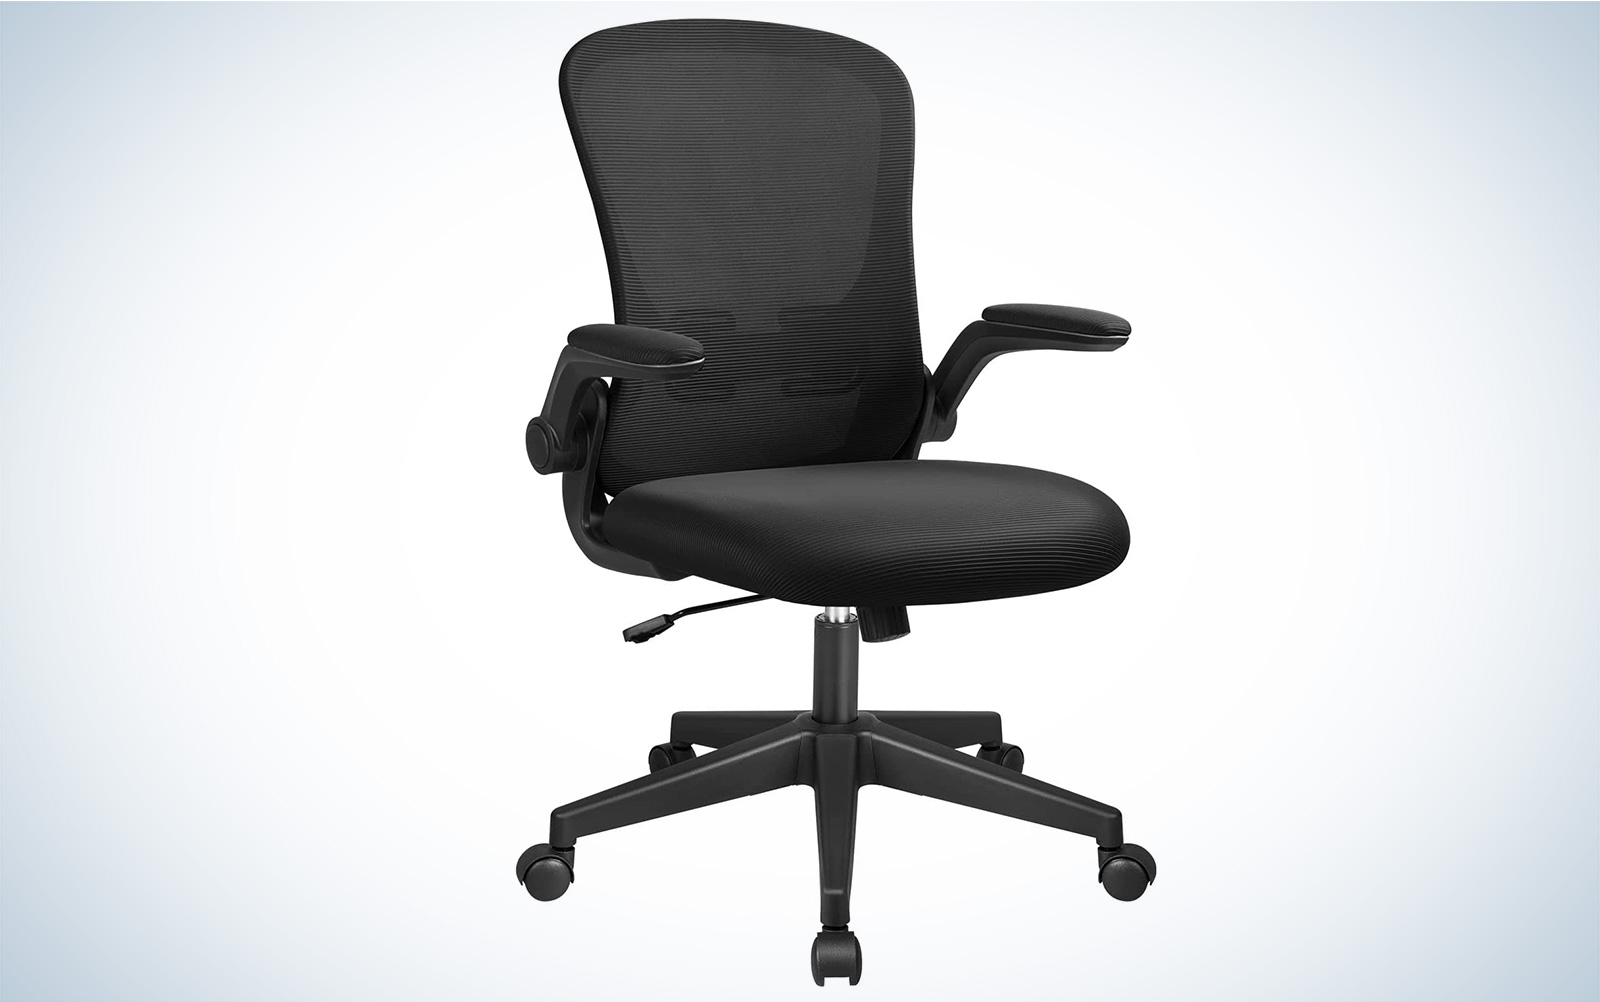 10 Best Orthopedic Office Chairs for Back Pain